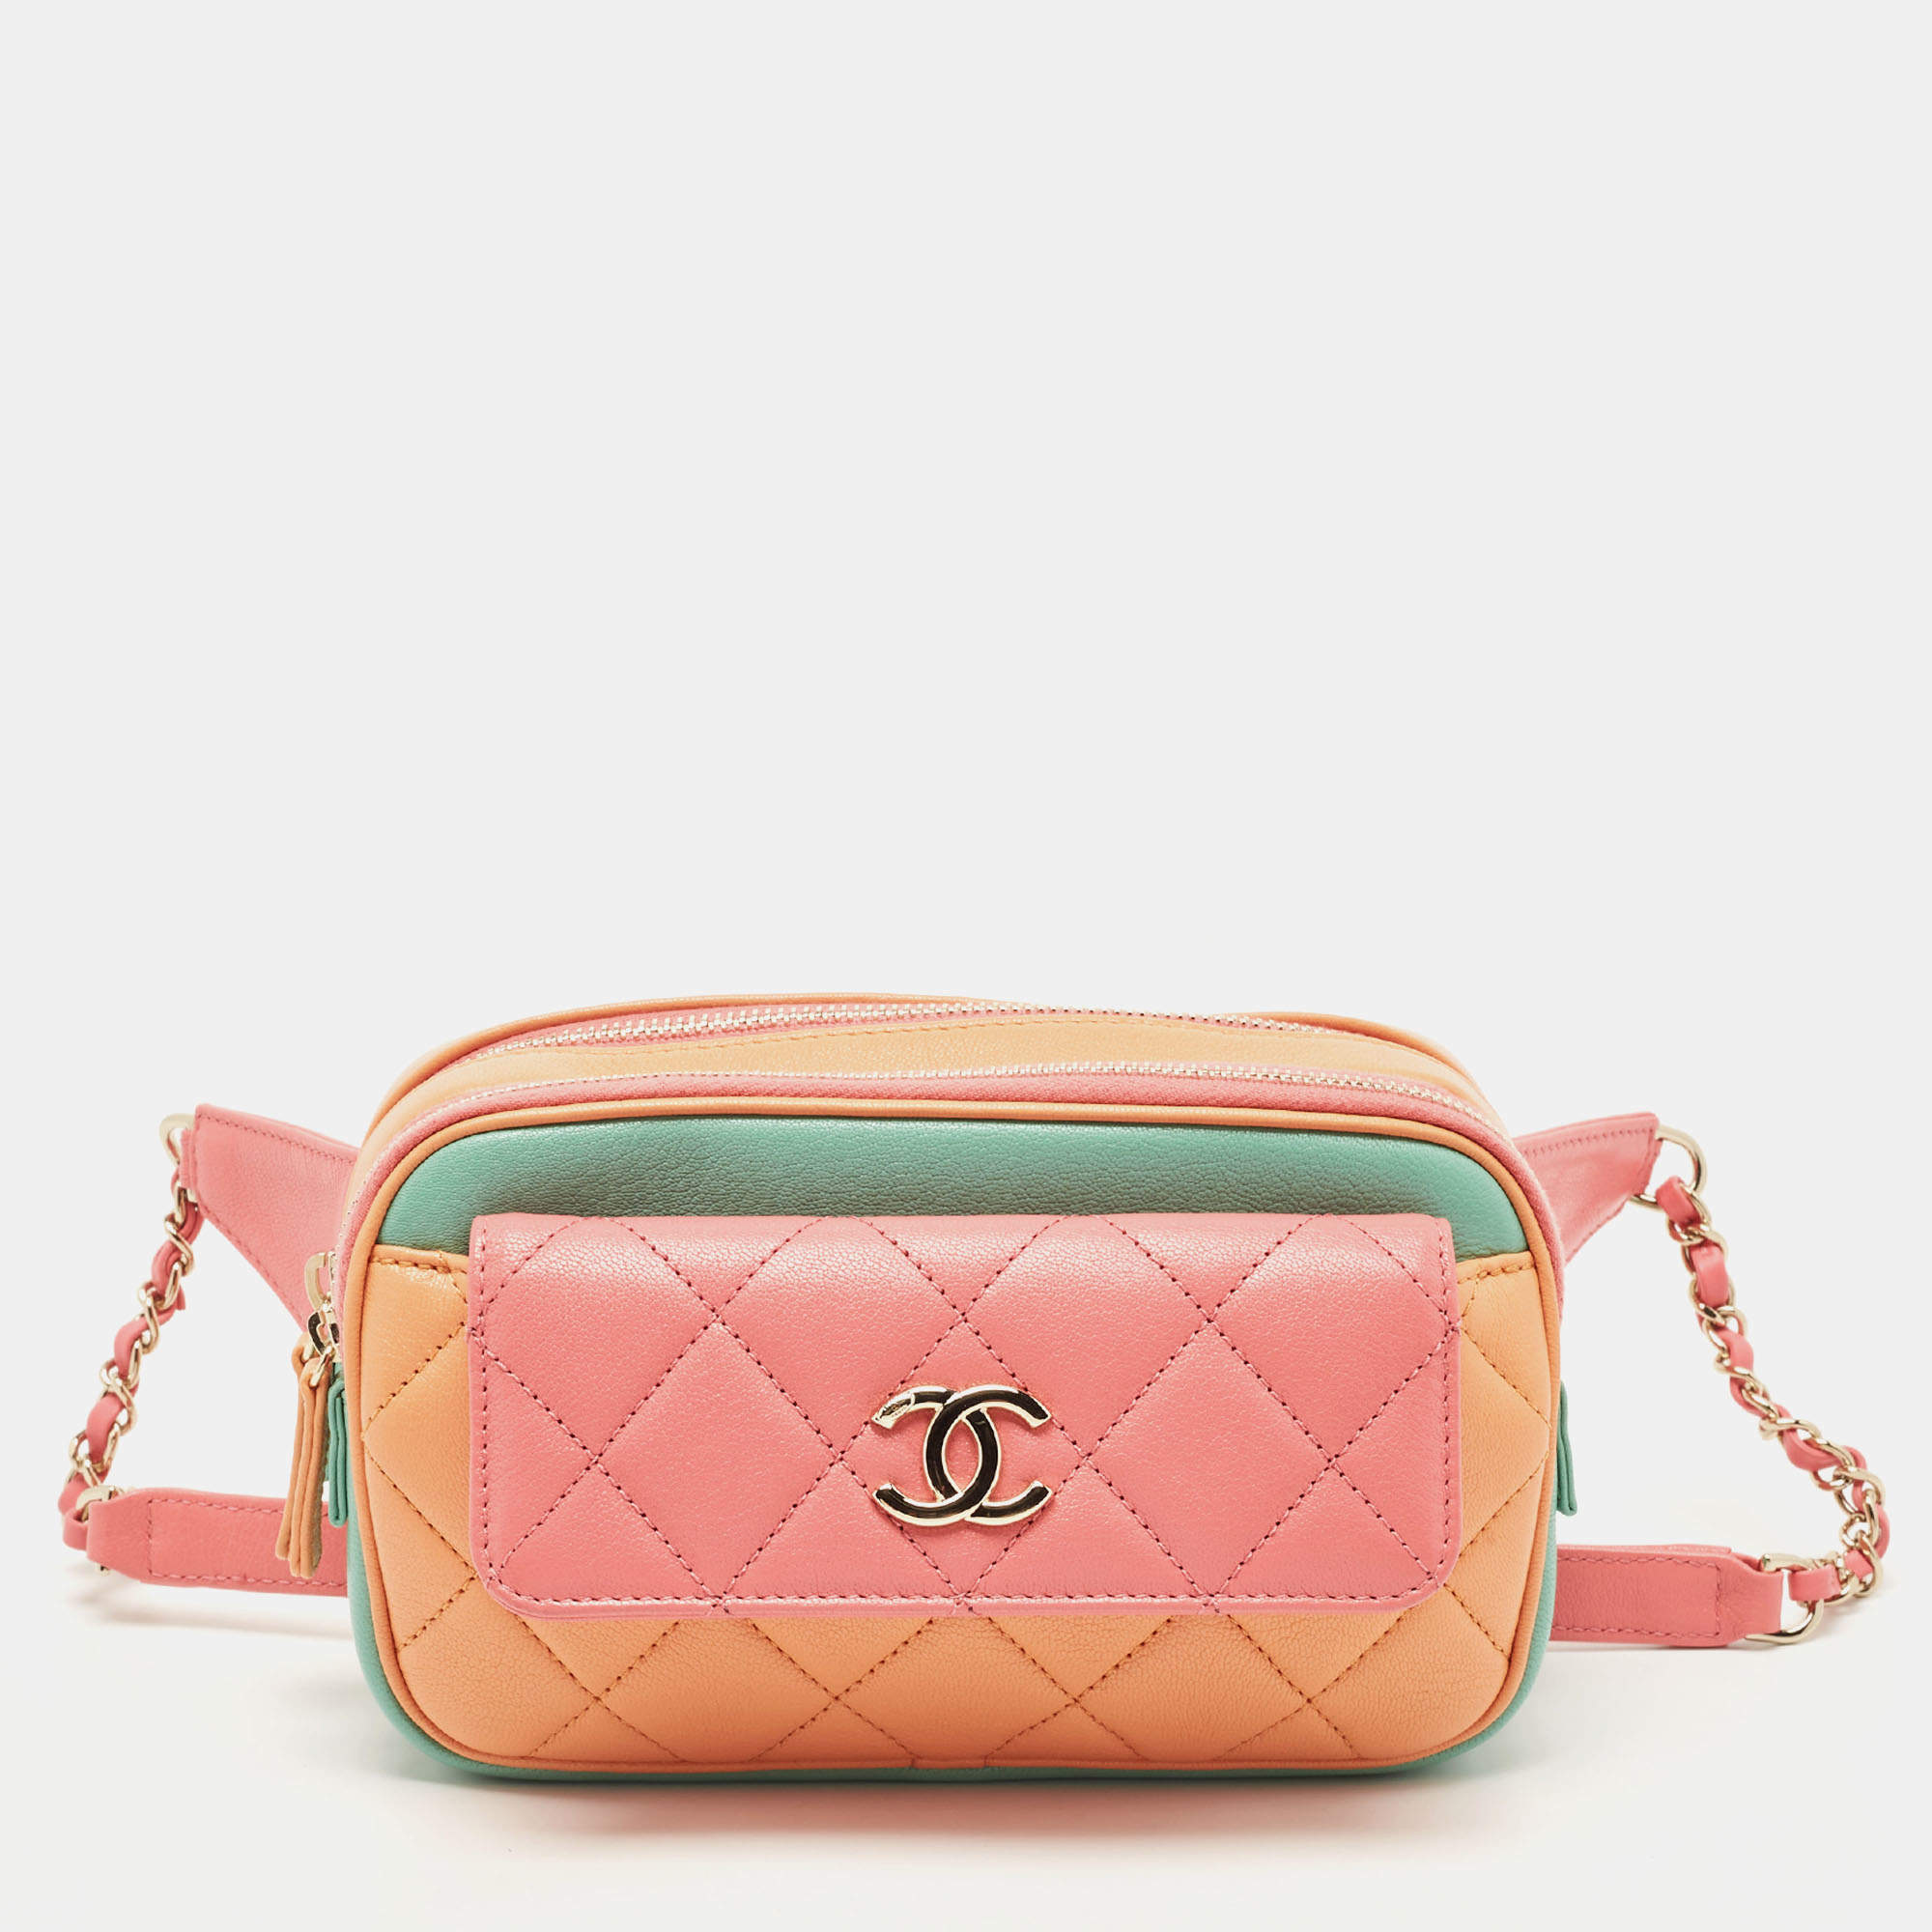 Chanel Multicolor Quilted Leather CC Double Zip Waist Bag